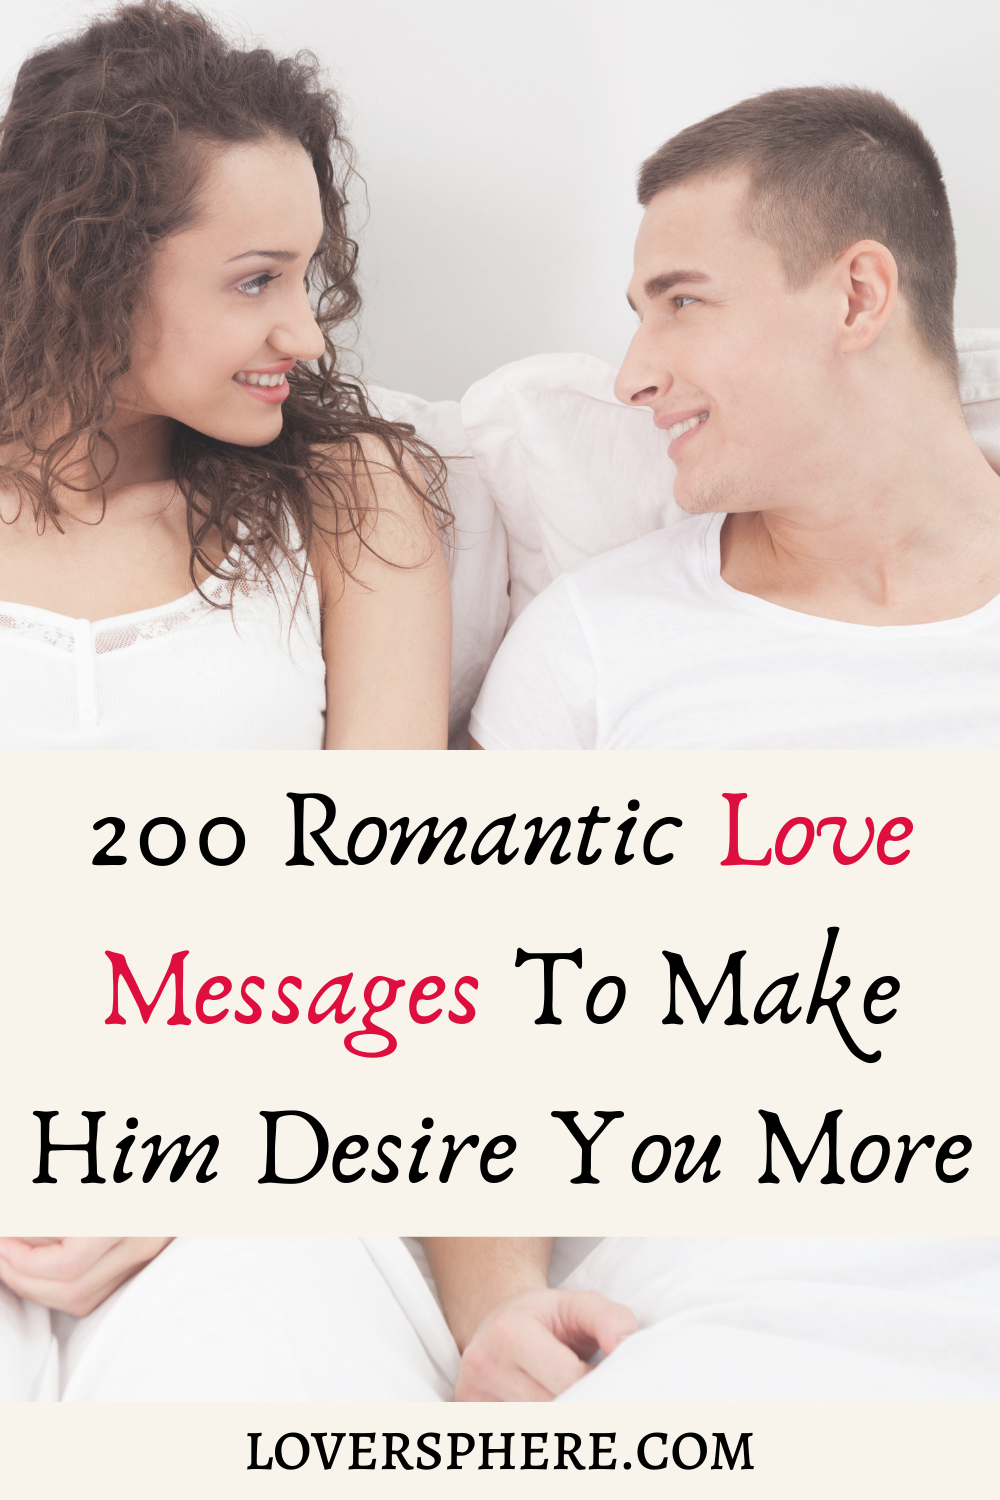 Romantic Love Messages For Deeper Connection With Him Or Her